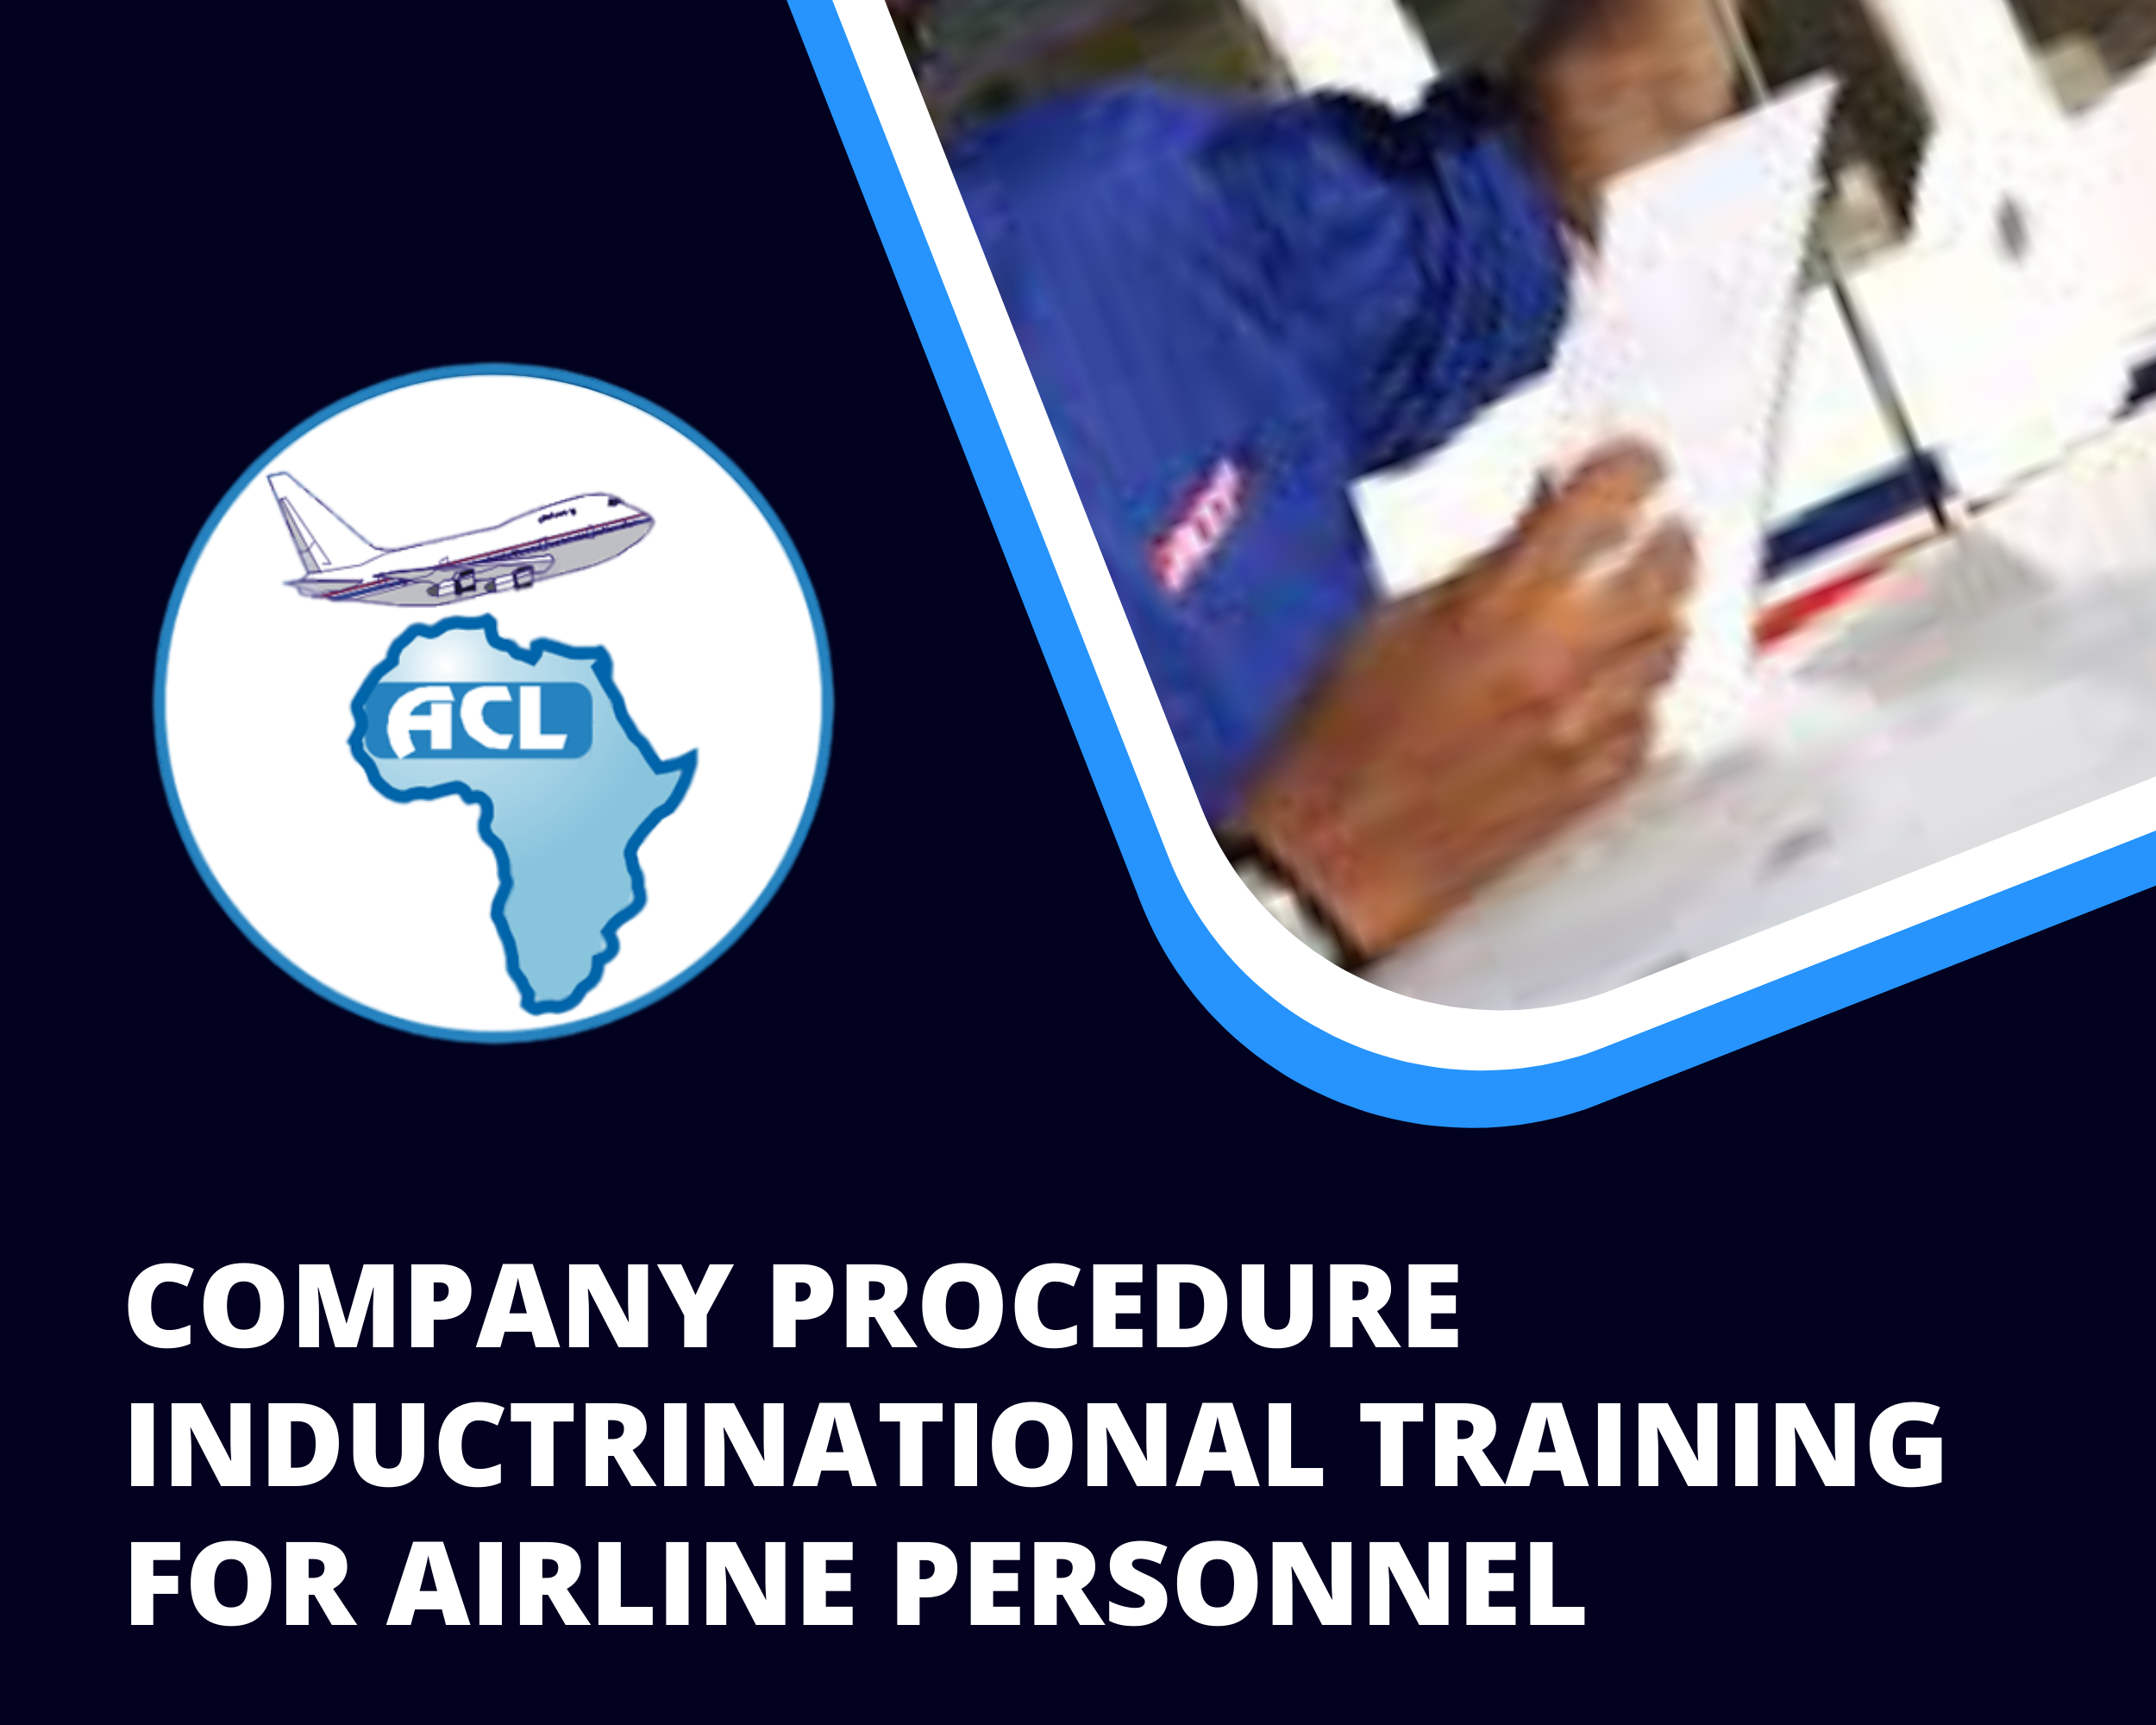 COMPANY PROCEDURE INDUCTRINATIONAL TRAINING FOR AIRLINE PERSONNEL